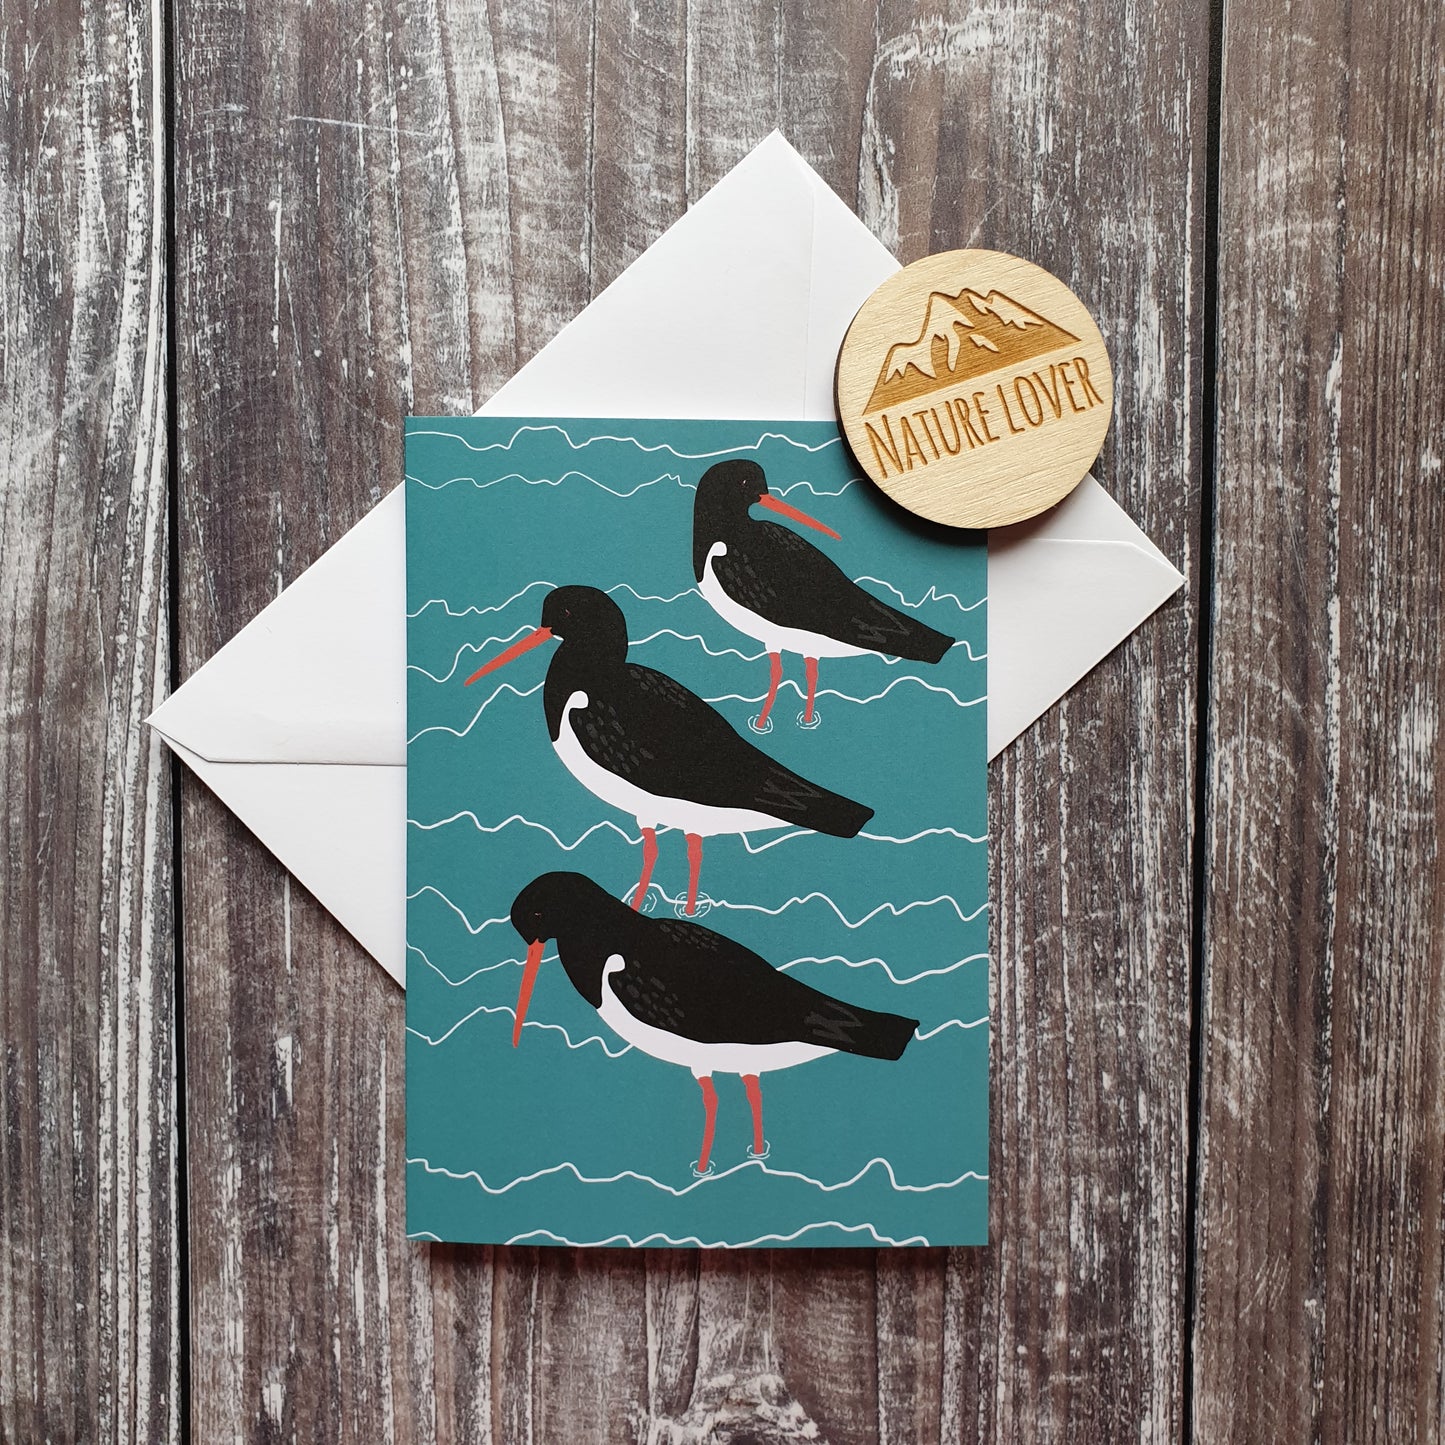 Oystercatchers Greeting Card